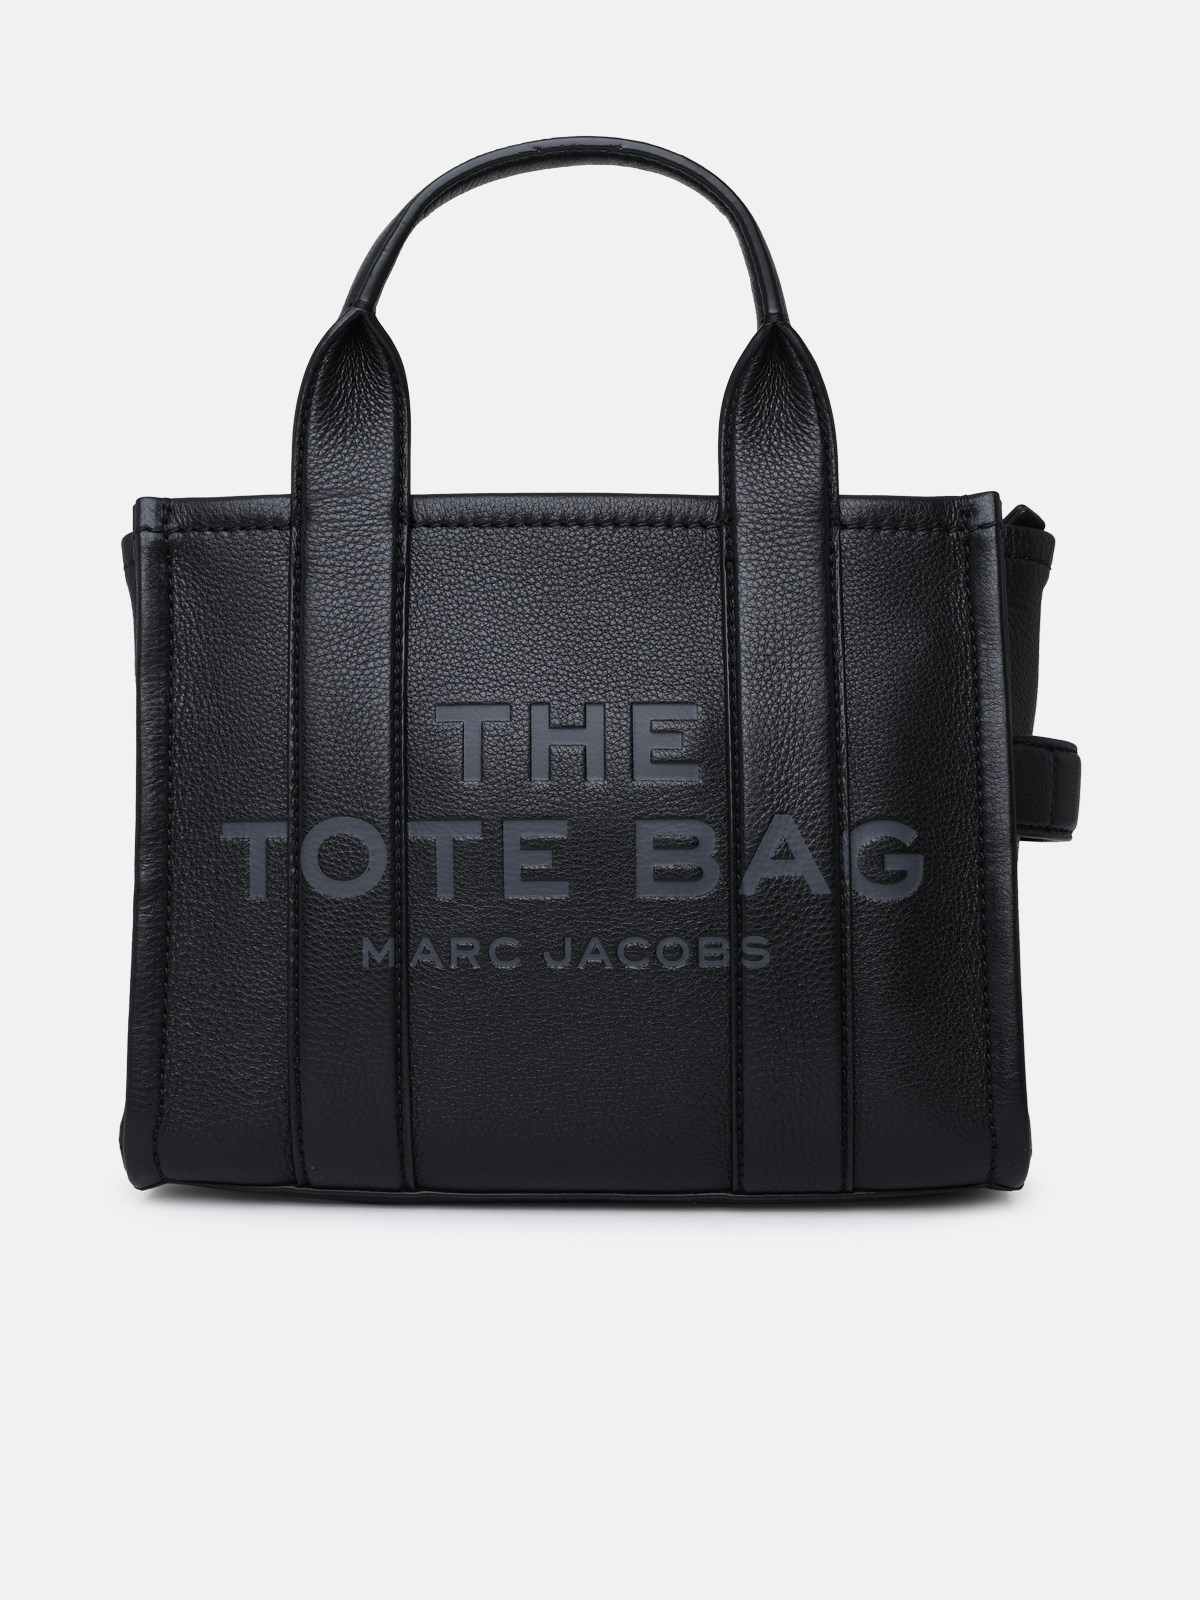 Marc Jacobs (the) The Tote Black Leather Bag